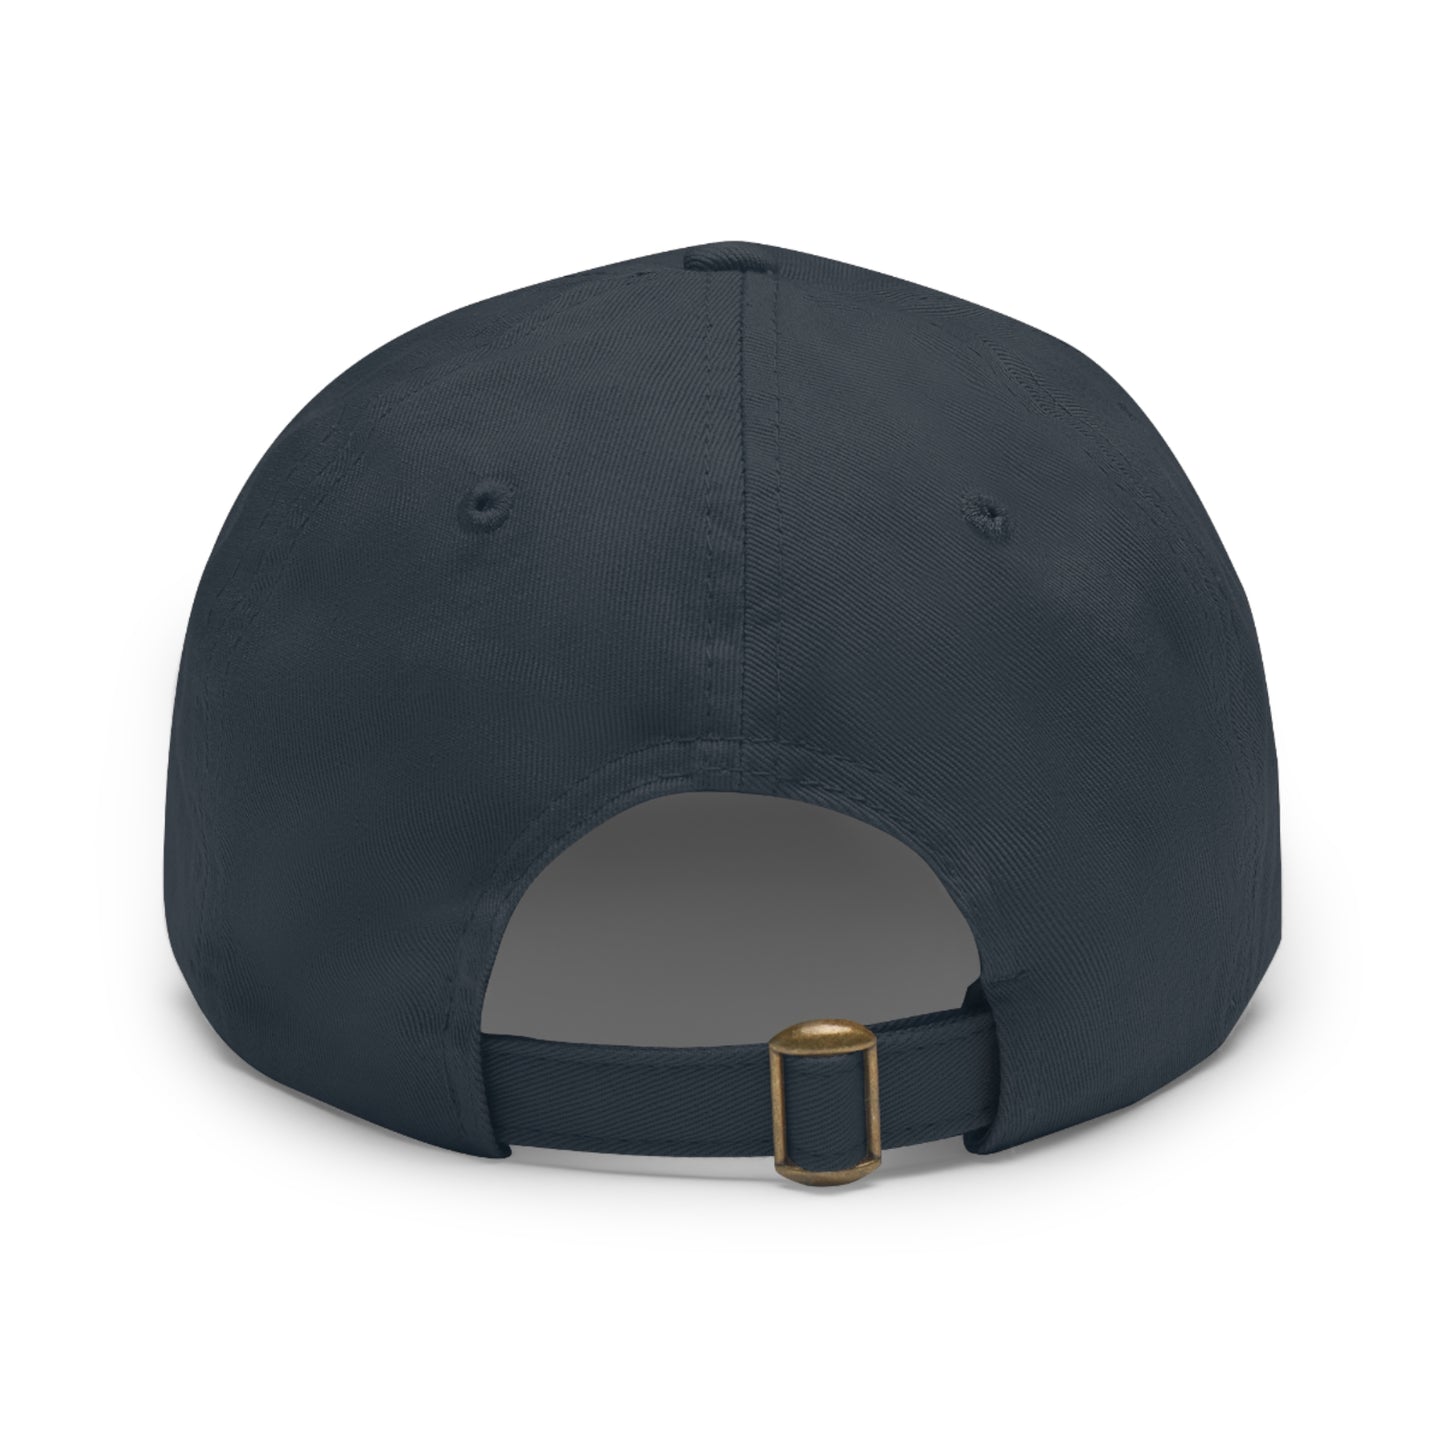 INSPIRED Dad Hat with Leather Patch